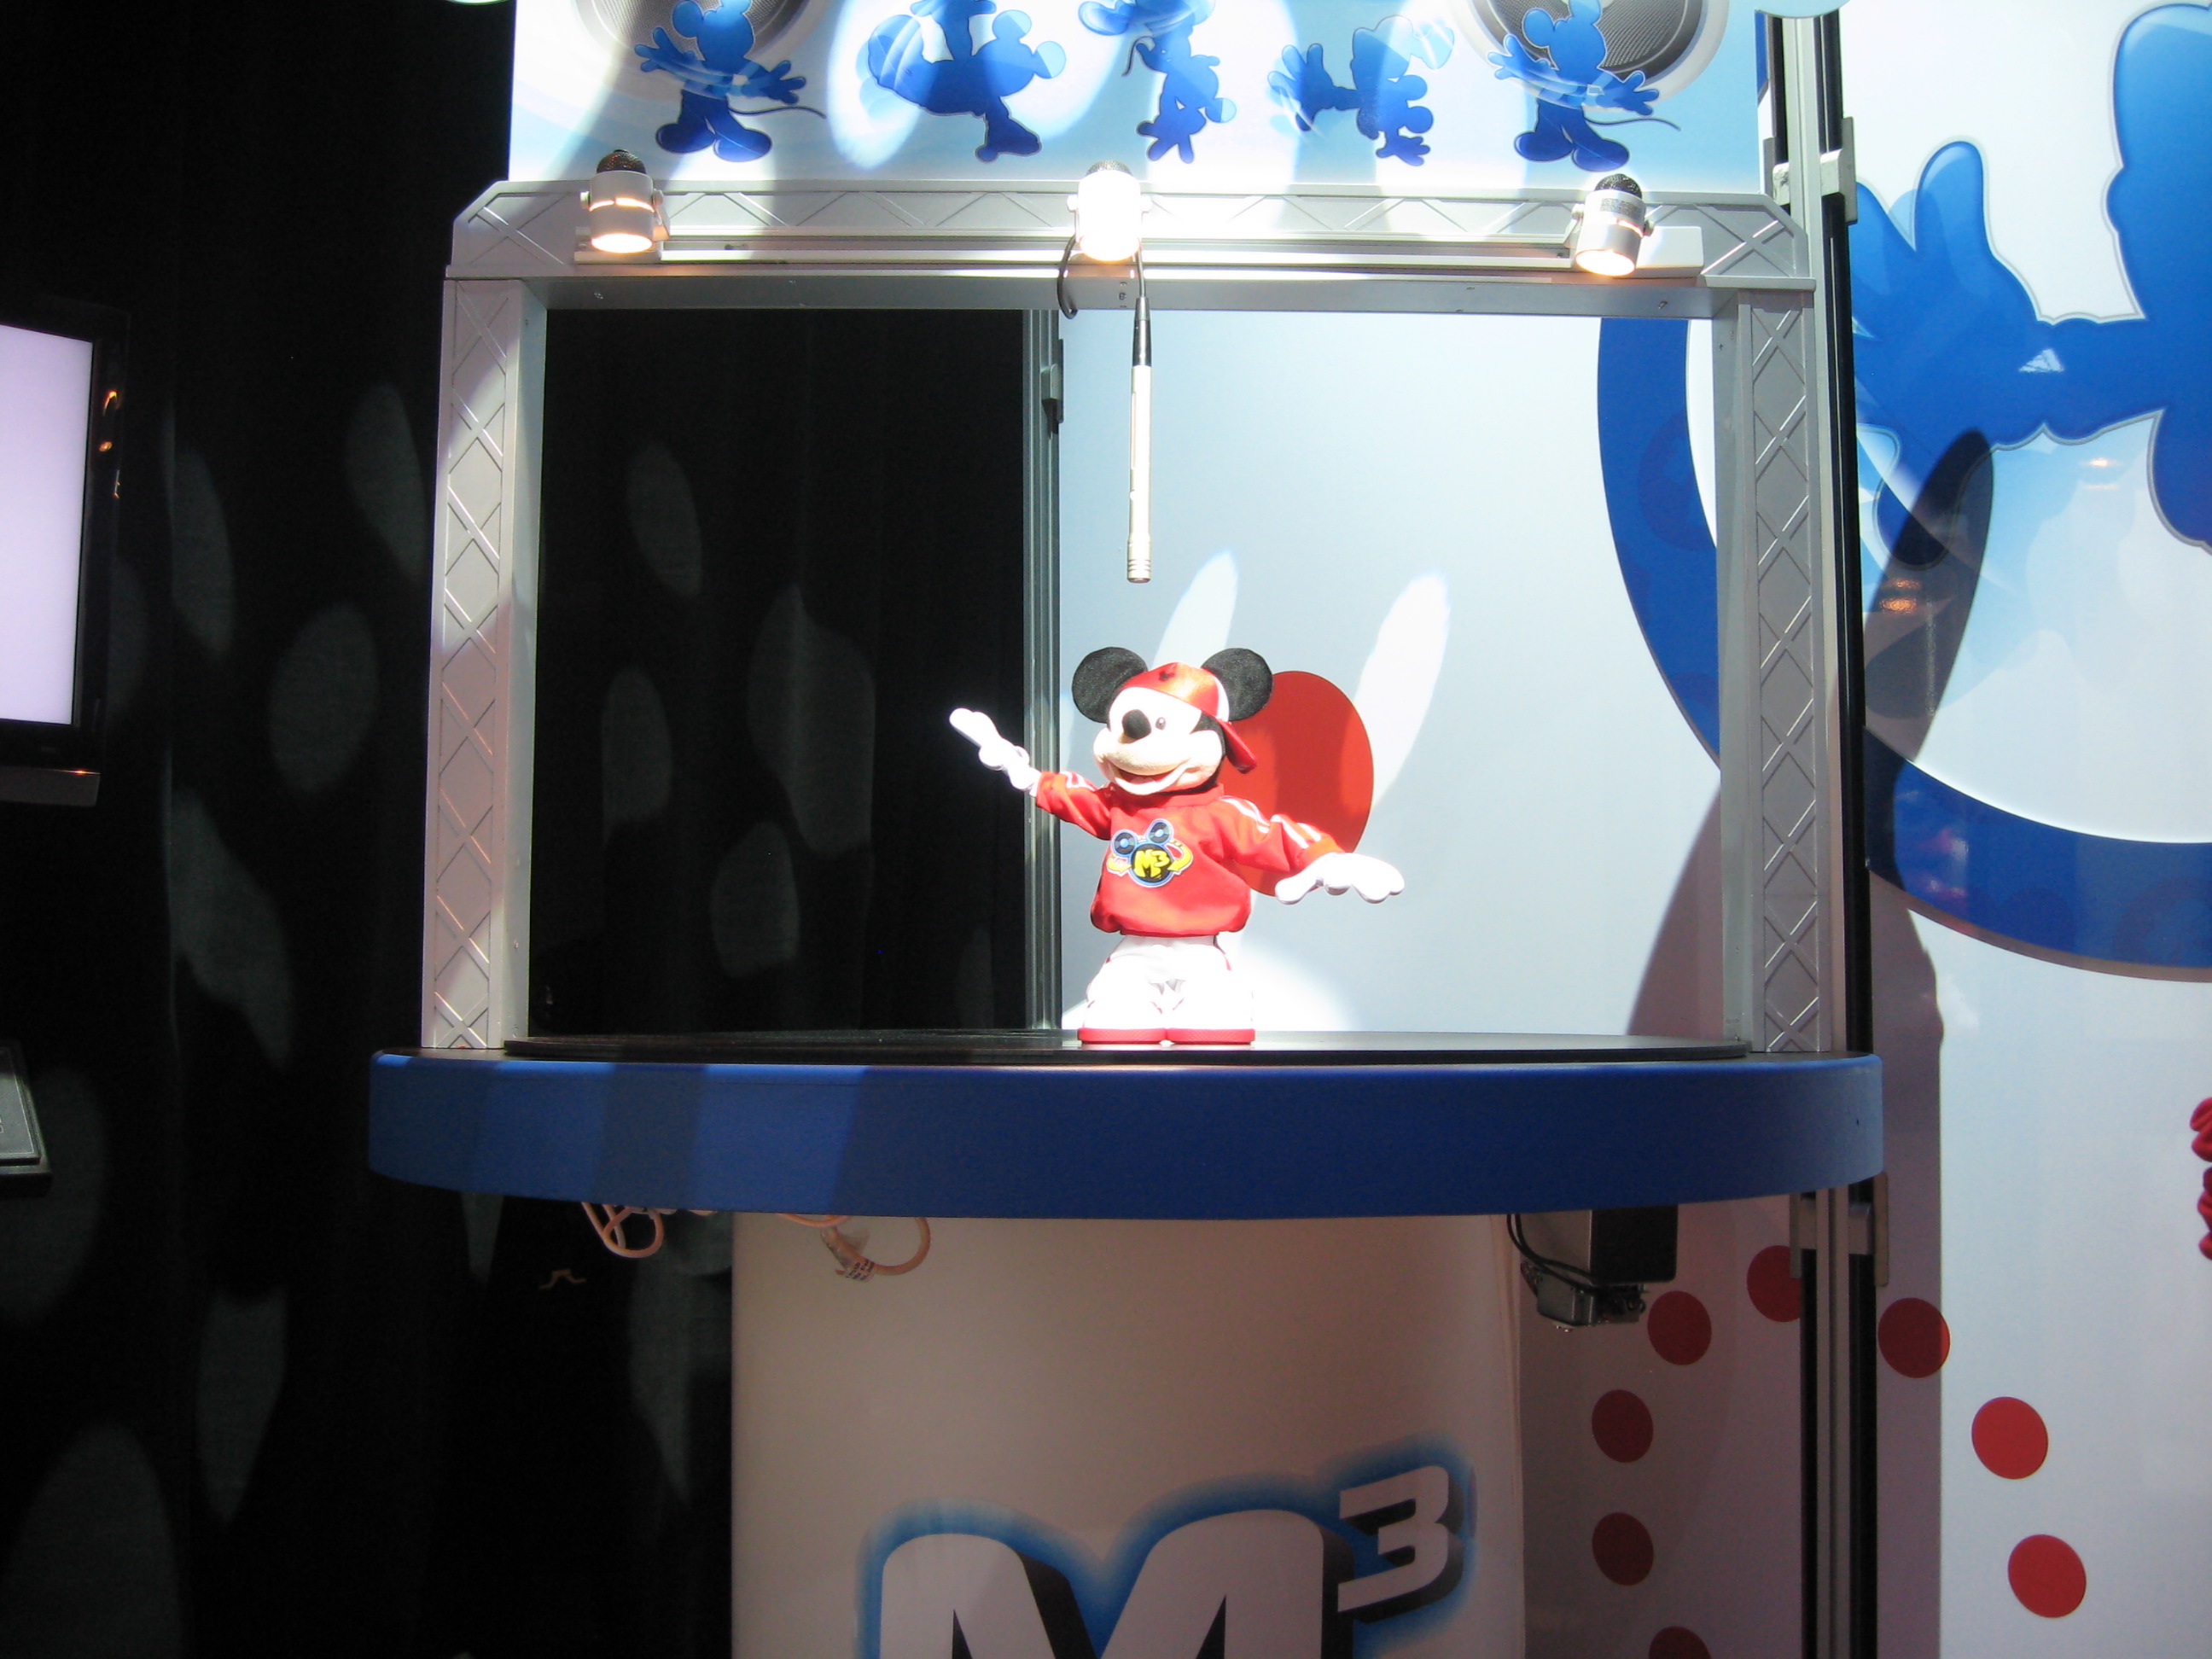 Equipment Mattel Displays What’s New at Toy Fair